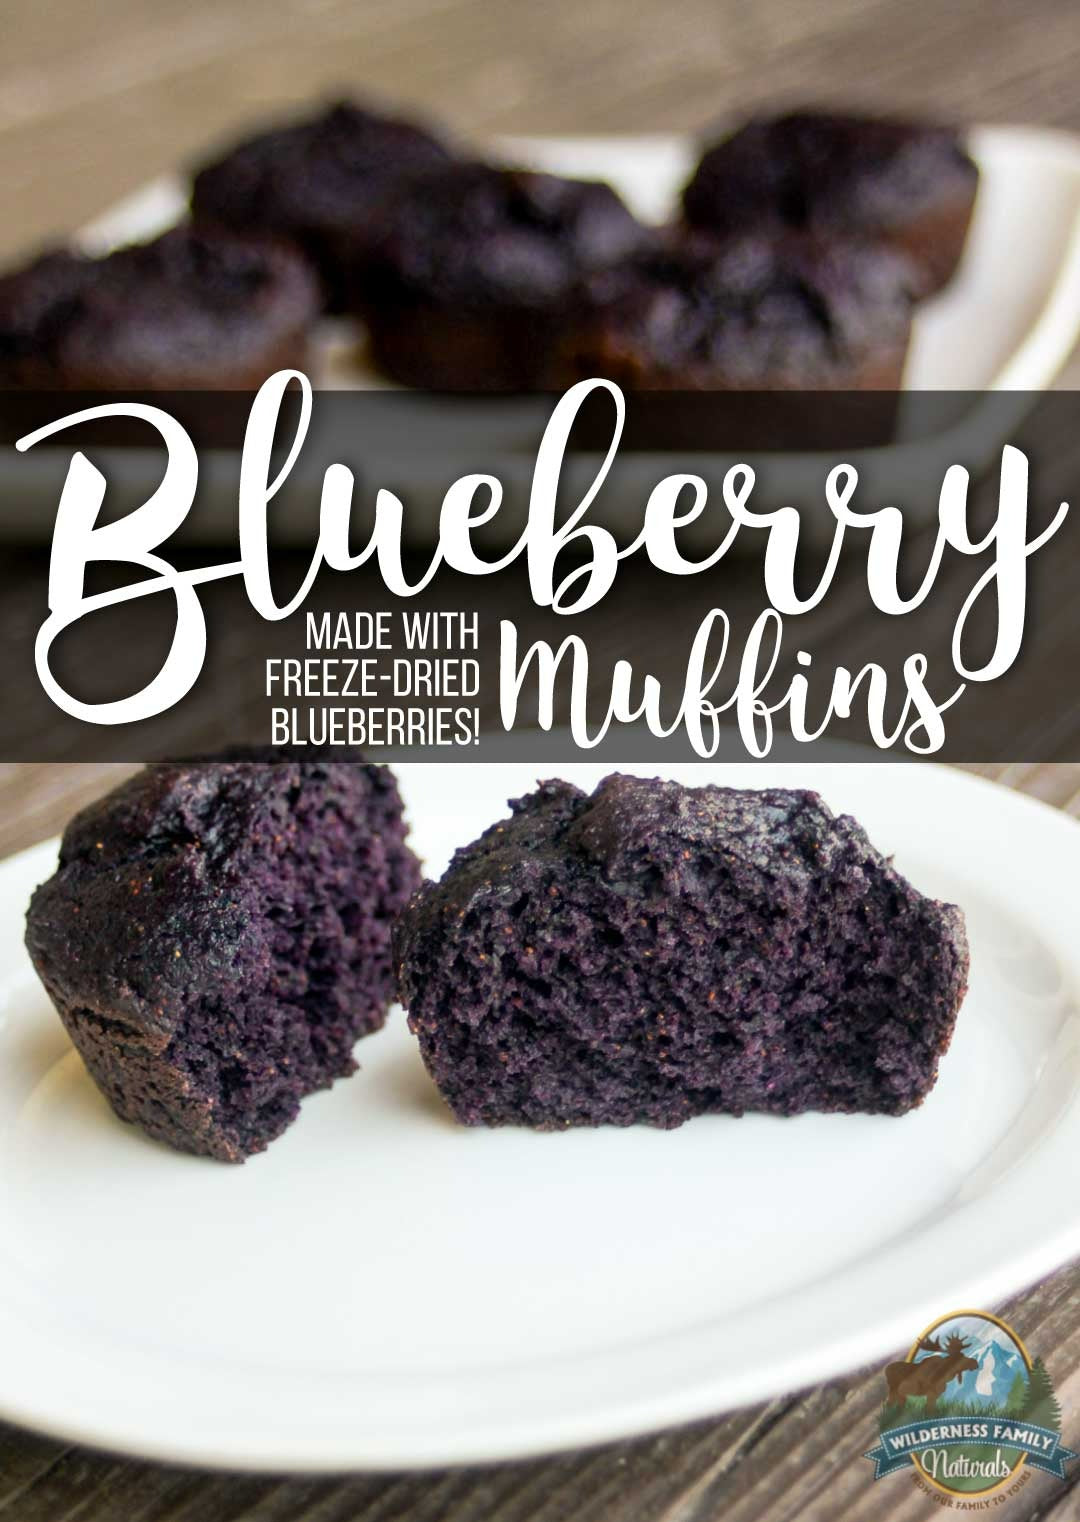 Blueberry Muffins (made with freeze-dried blueberries!)